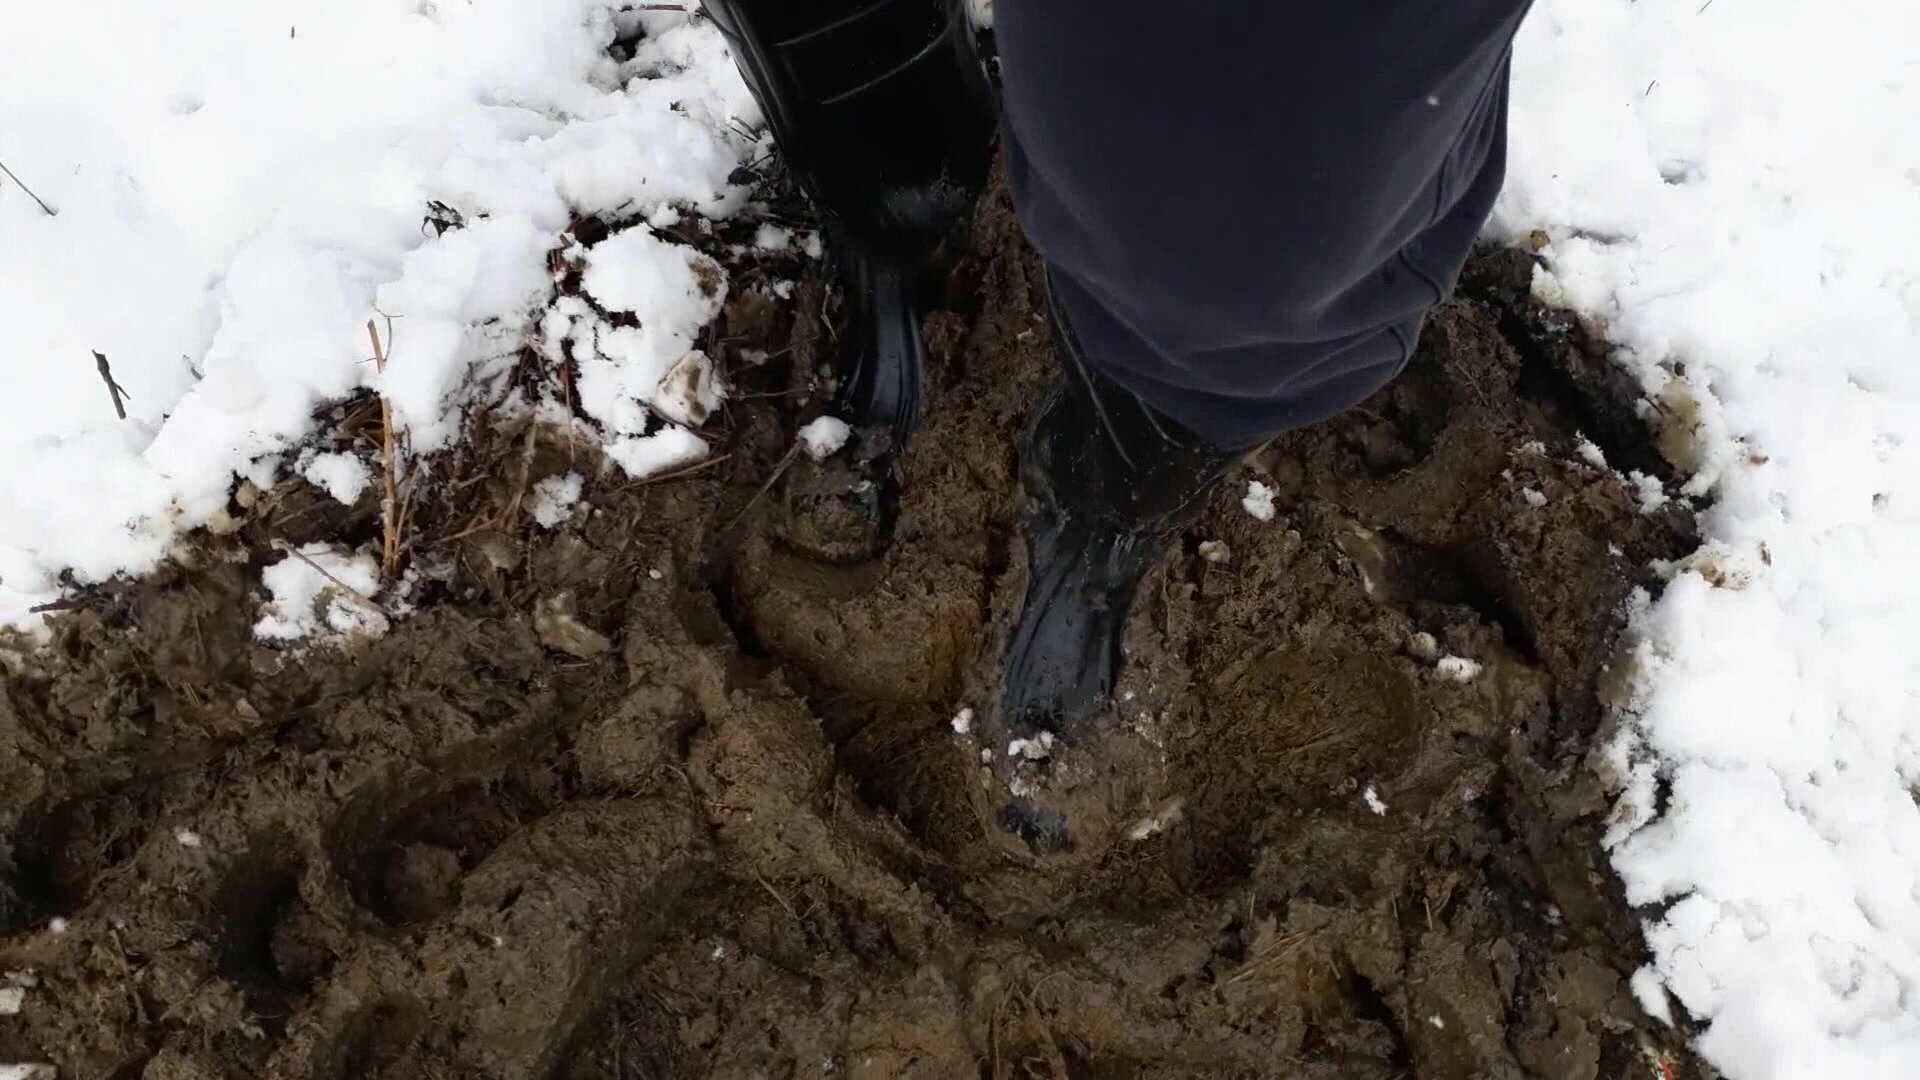 Rubber boots vs manure - video 4